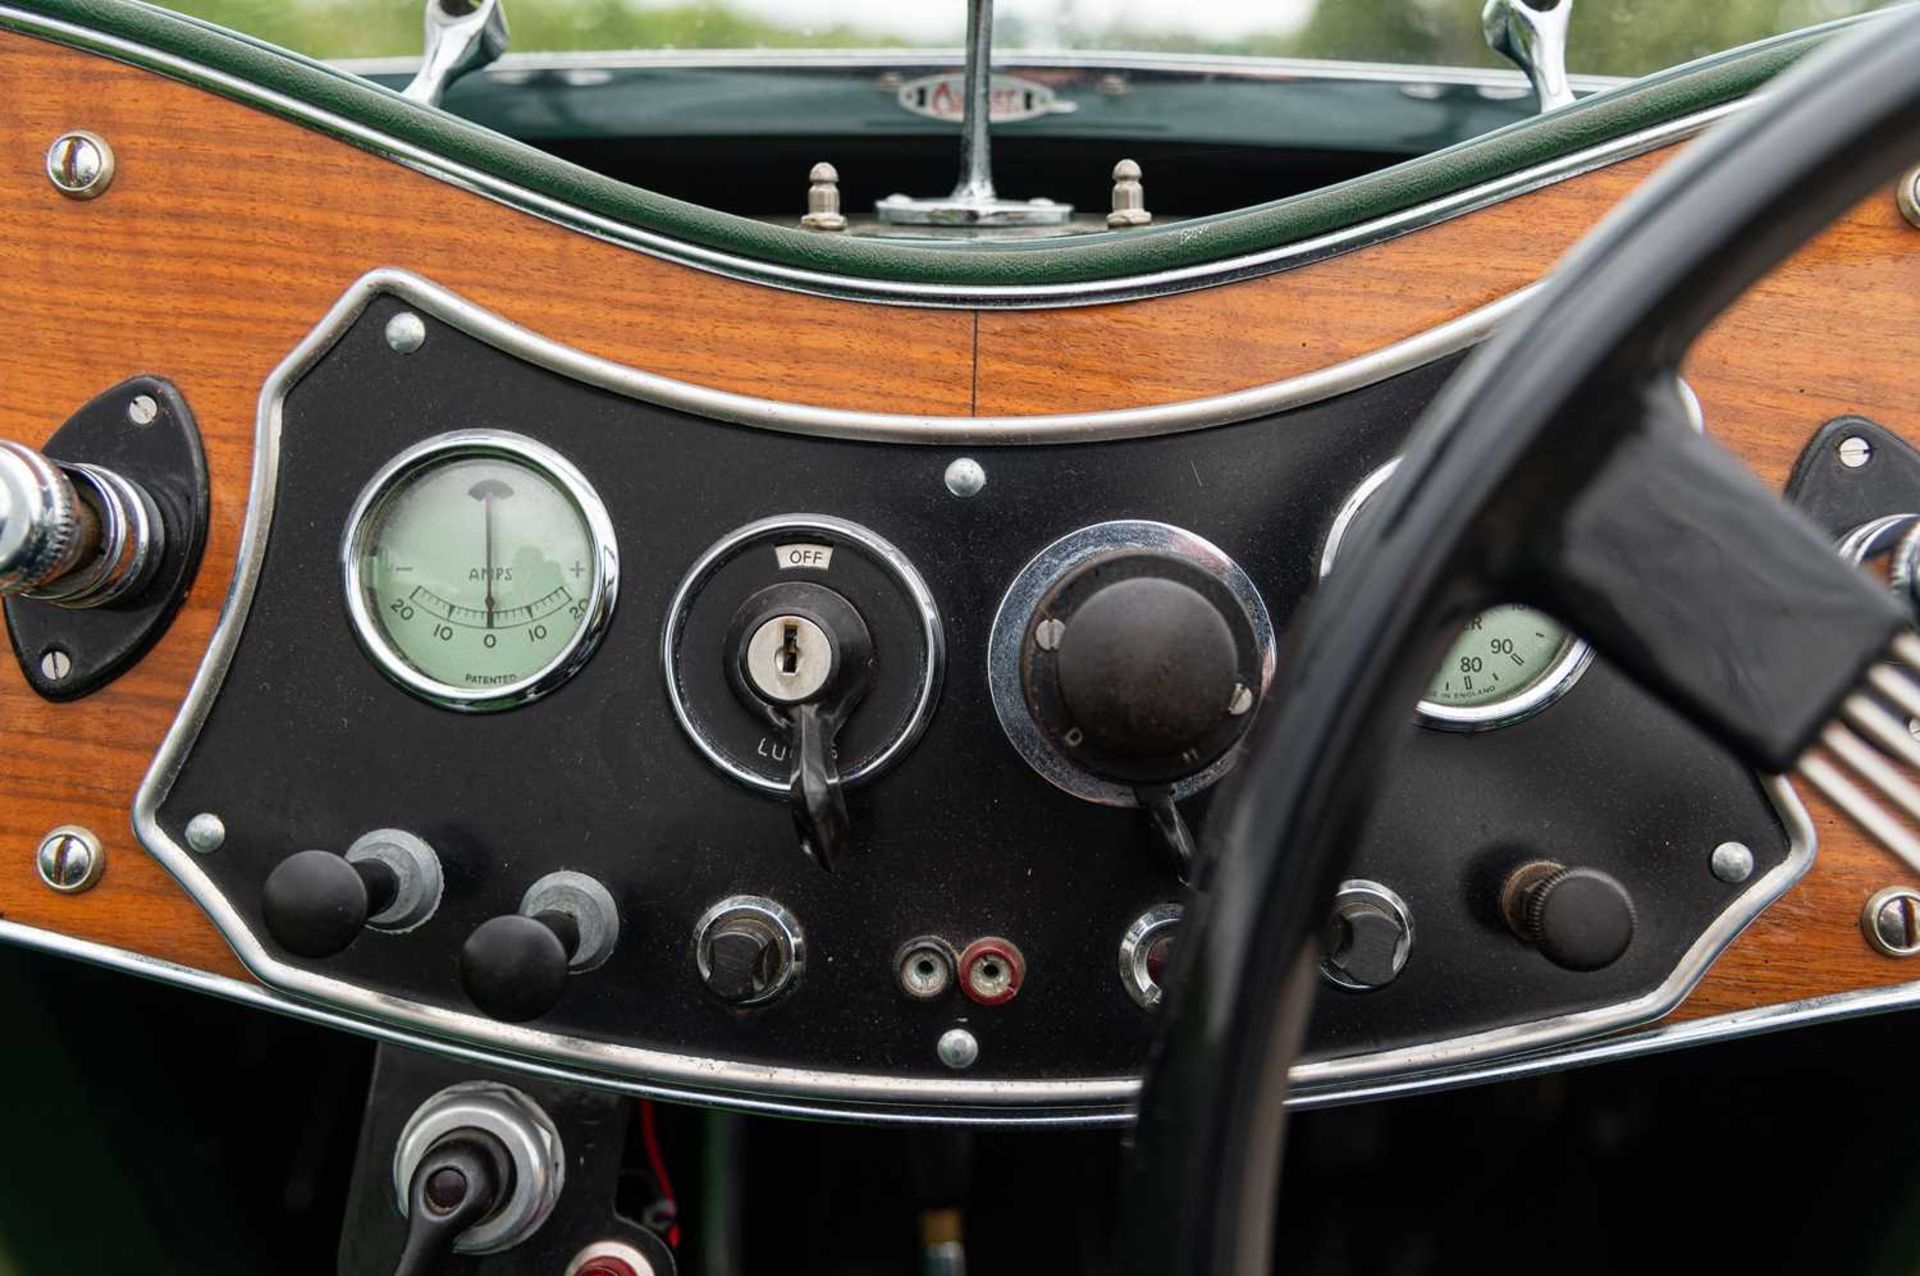 1947 MG TC Midget  Fully restored, right-hand-drive UK home market example - Image 54 of 76